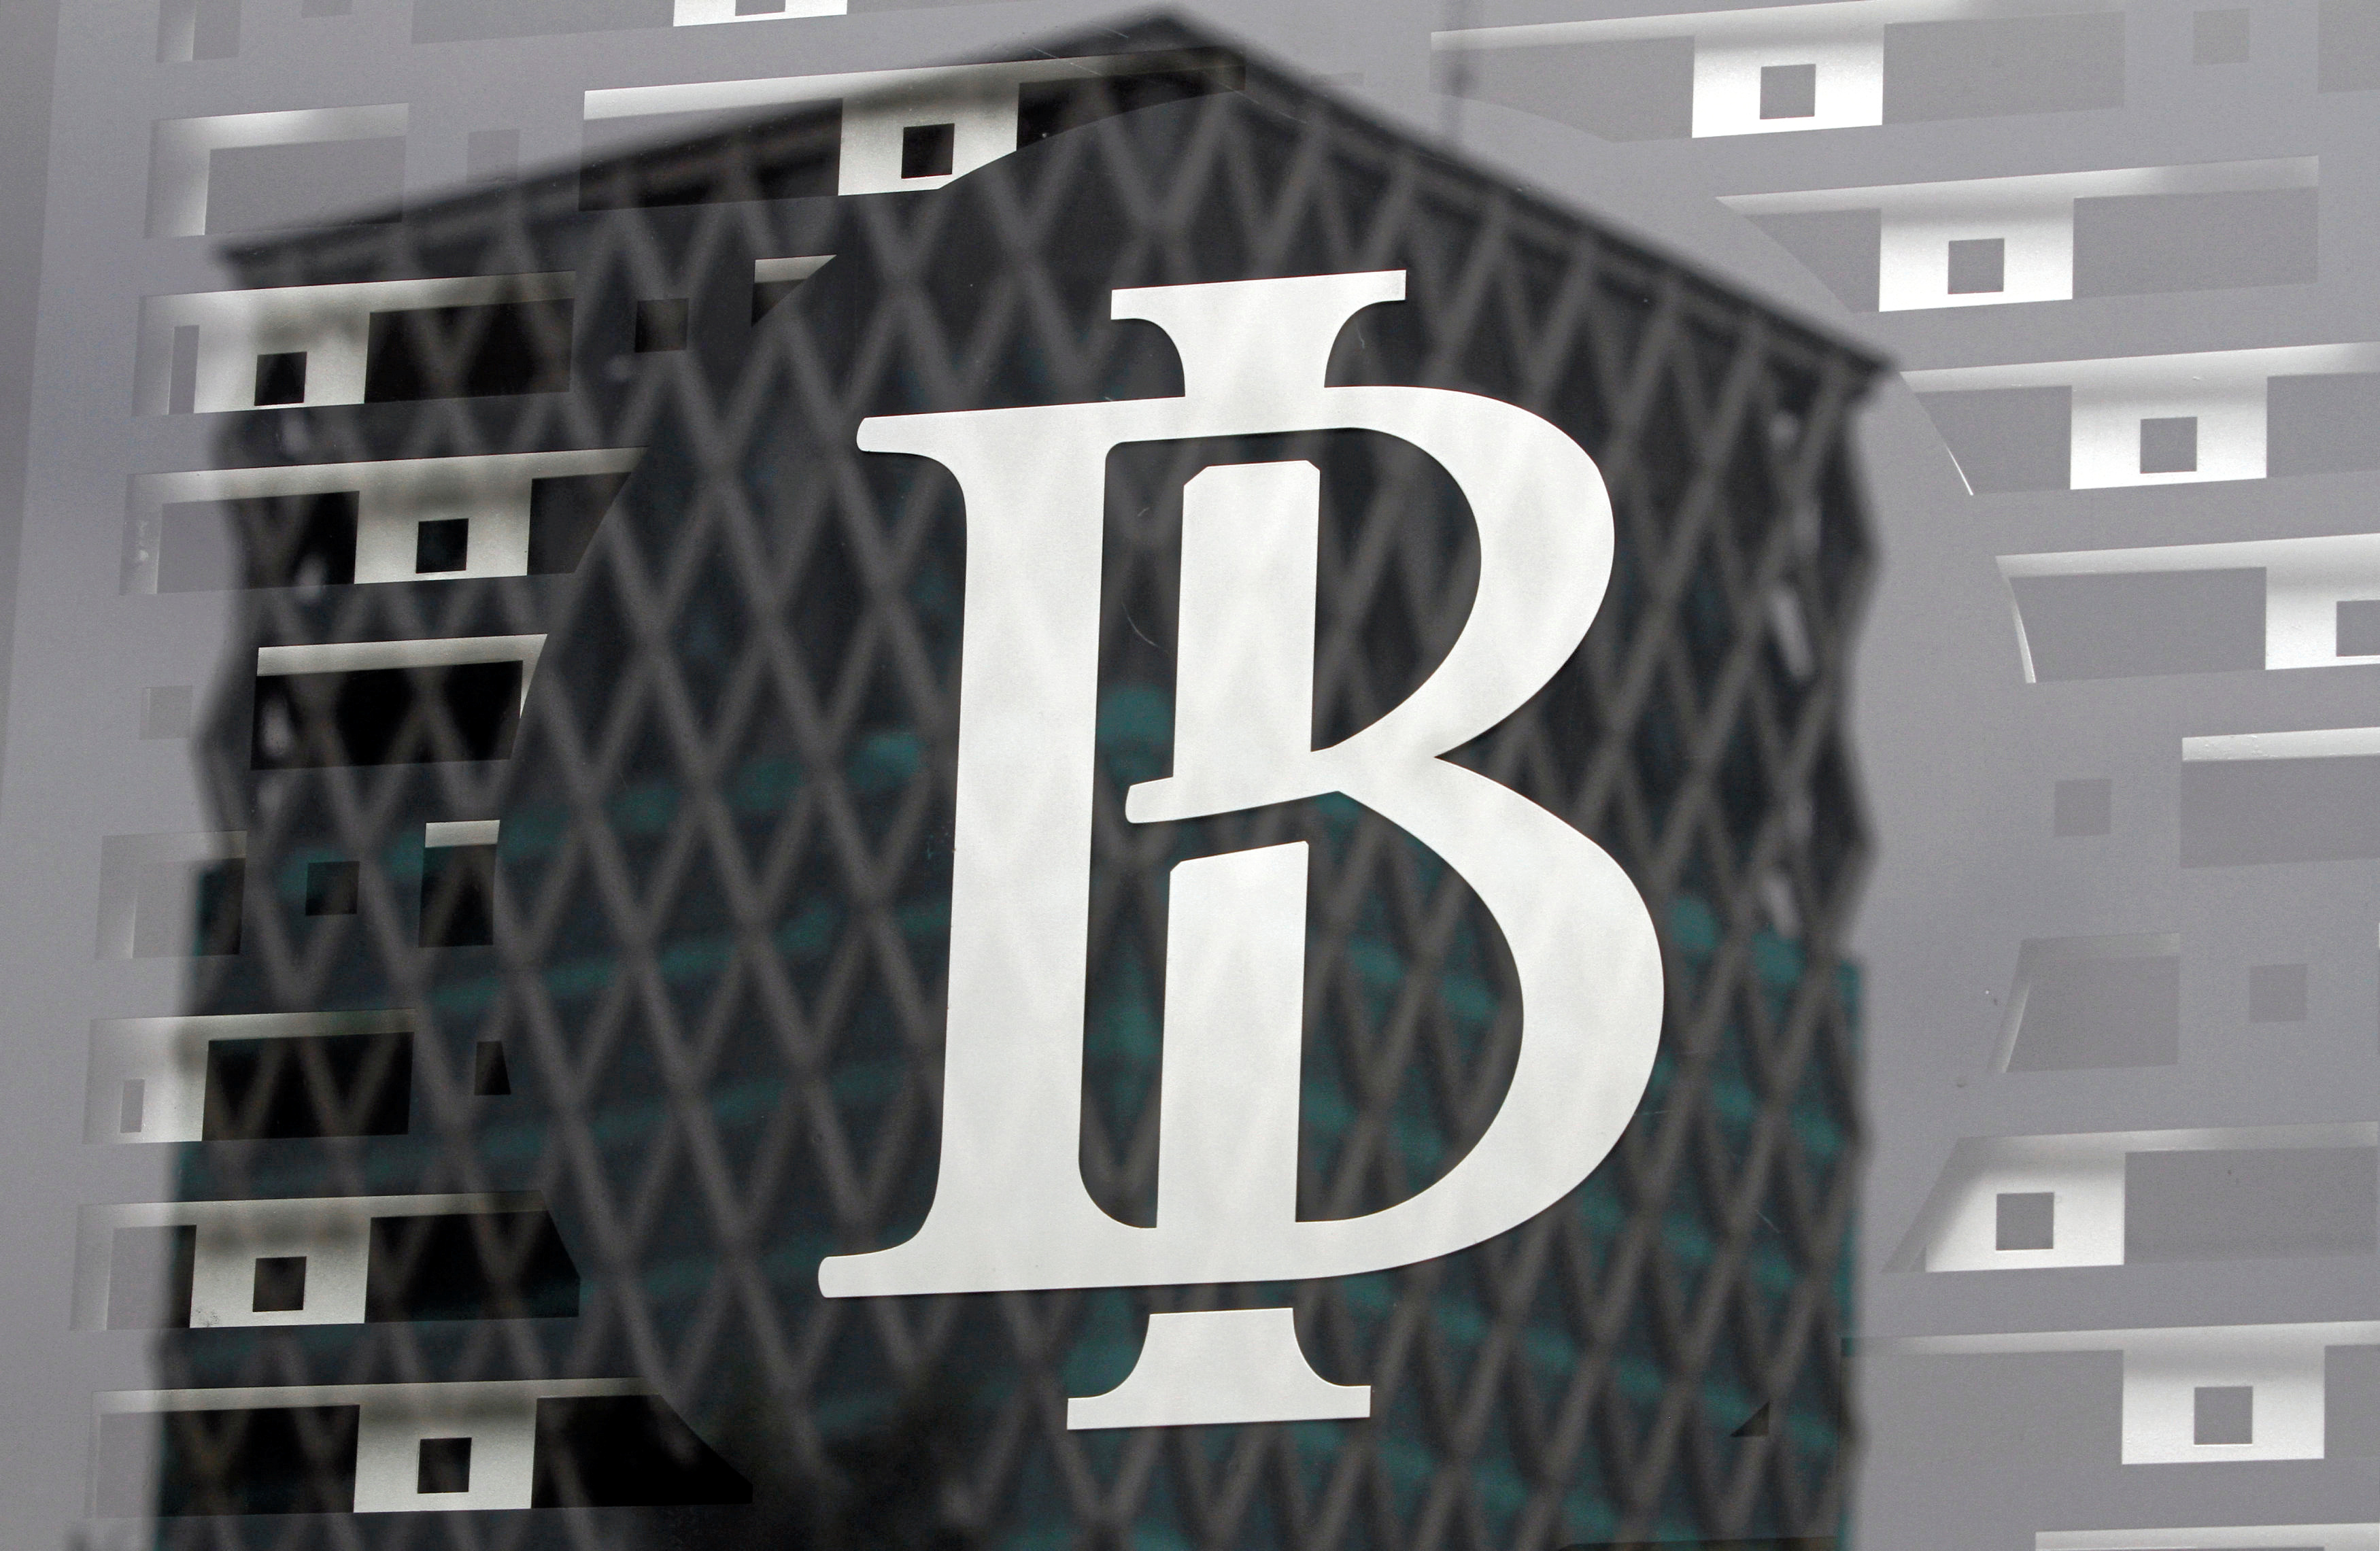 The logo of Indonesia's central bank, Bank Indonesia, is seen on a window in the bank's lobby in Jakarta, Indonesia